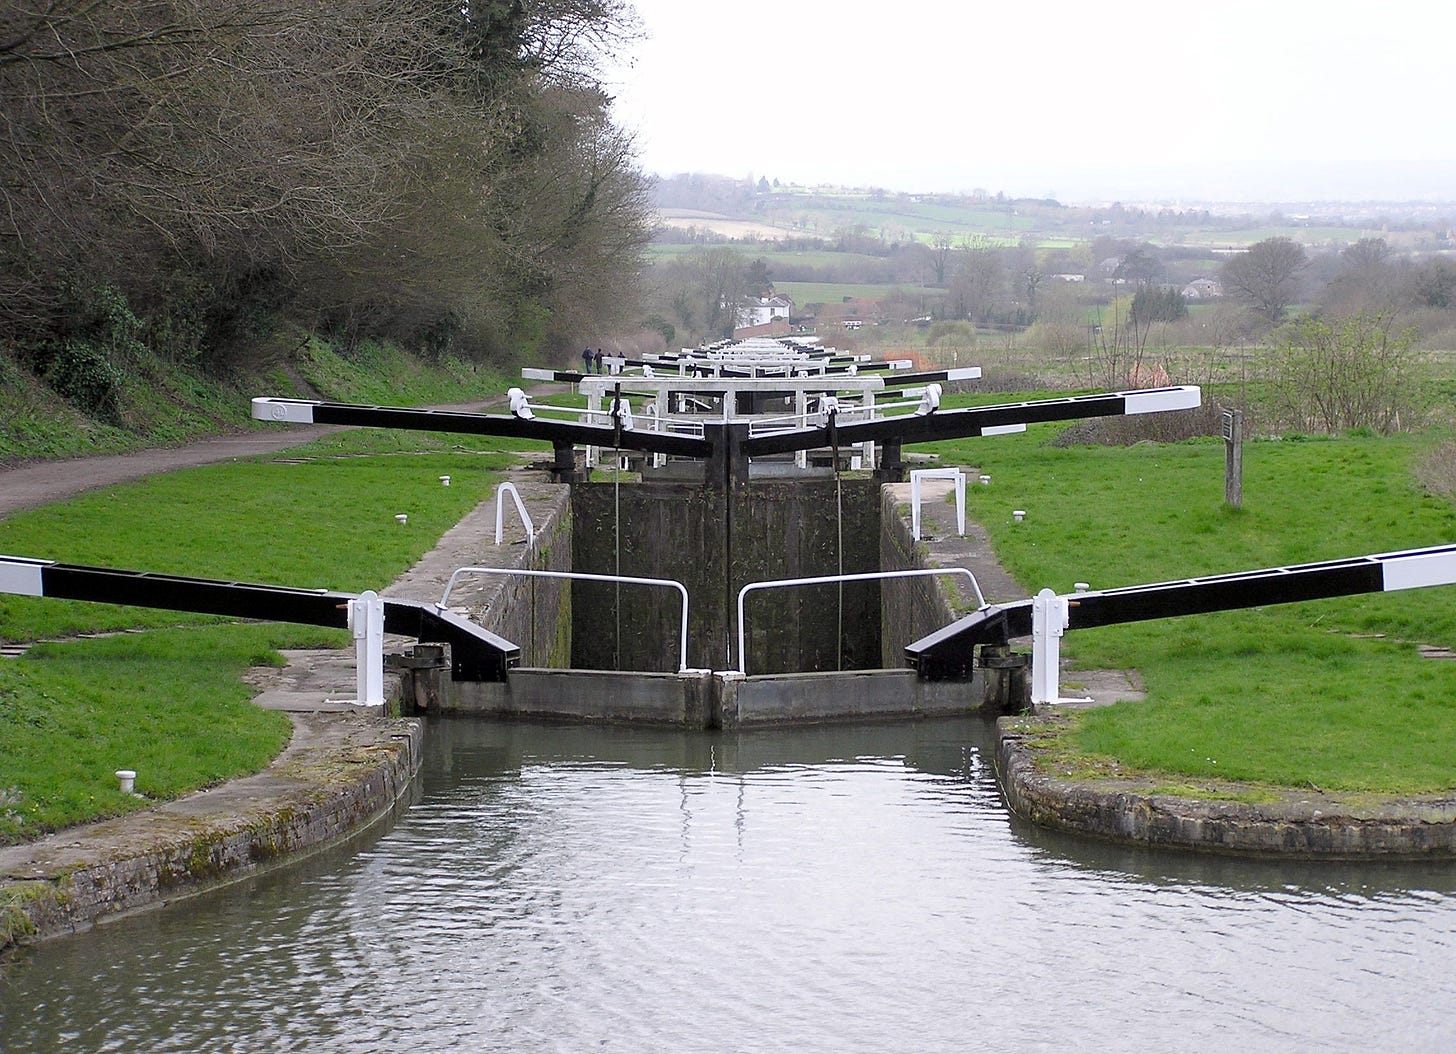 Example of a lock which has gates allowing boats to be raised or lowered in a river.